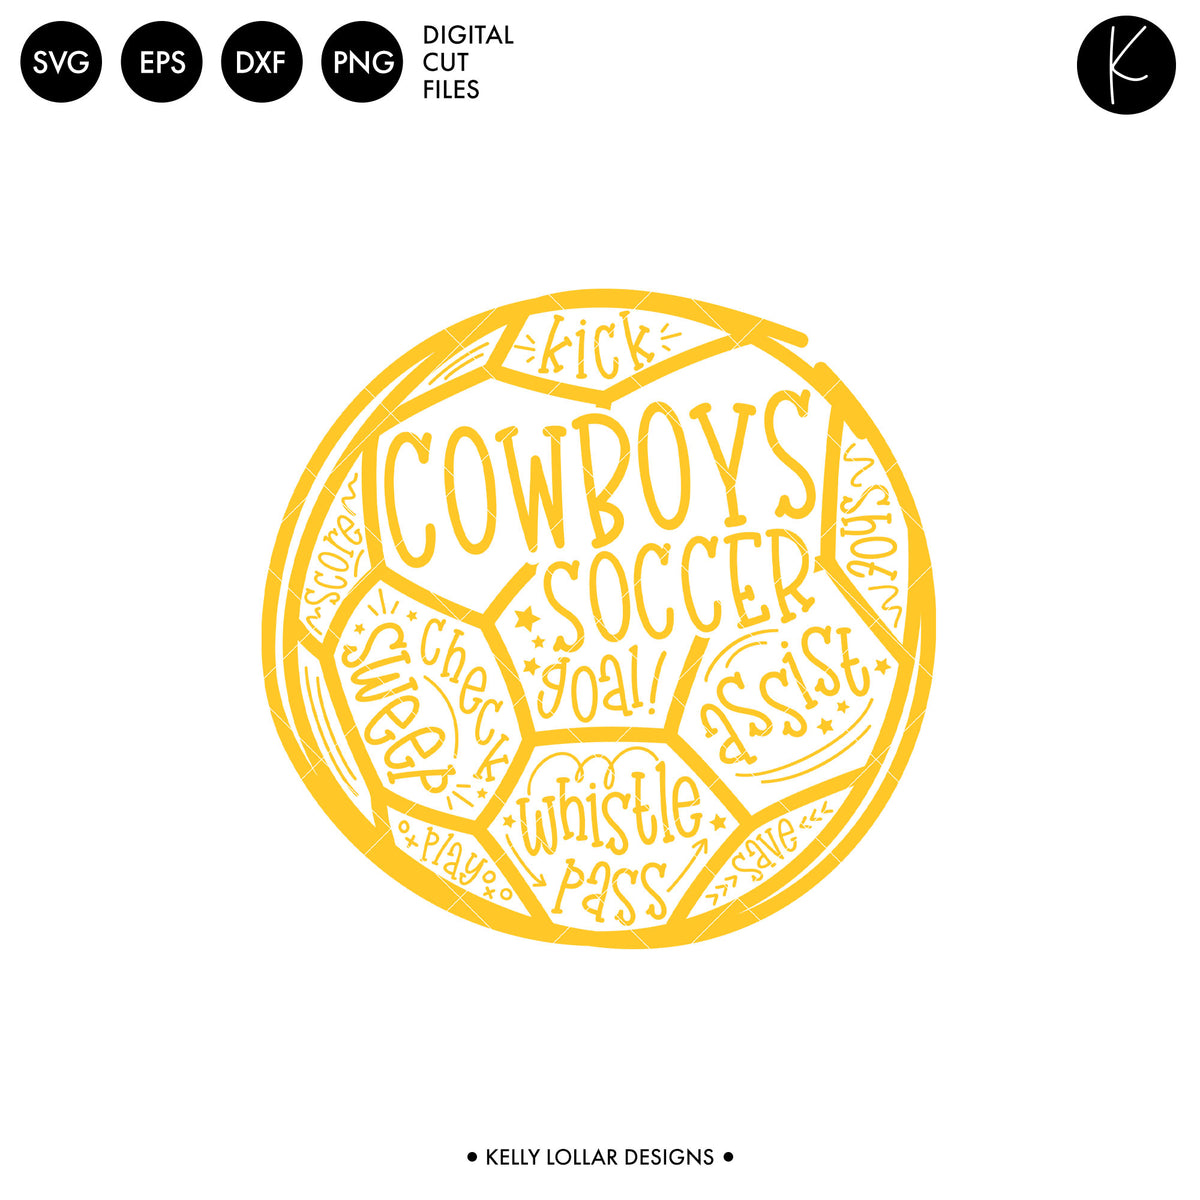 Cowboys &amp; Cowgirls Soccer and Football Bundle | SVG DXF EPS PNG Cut Files